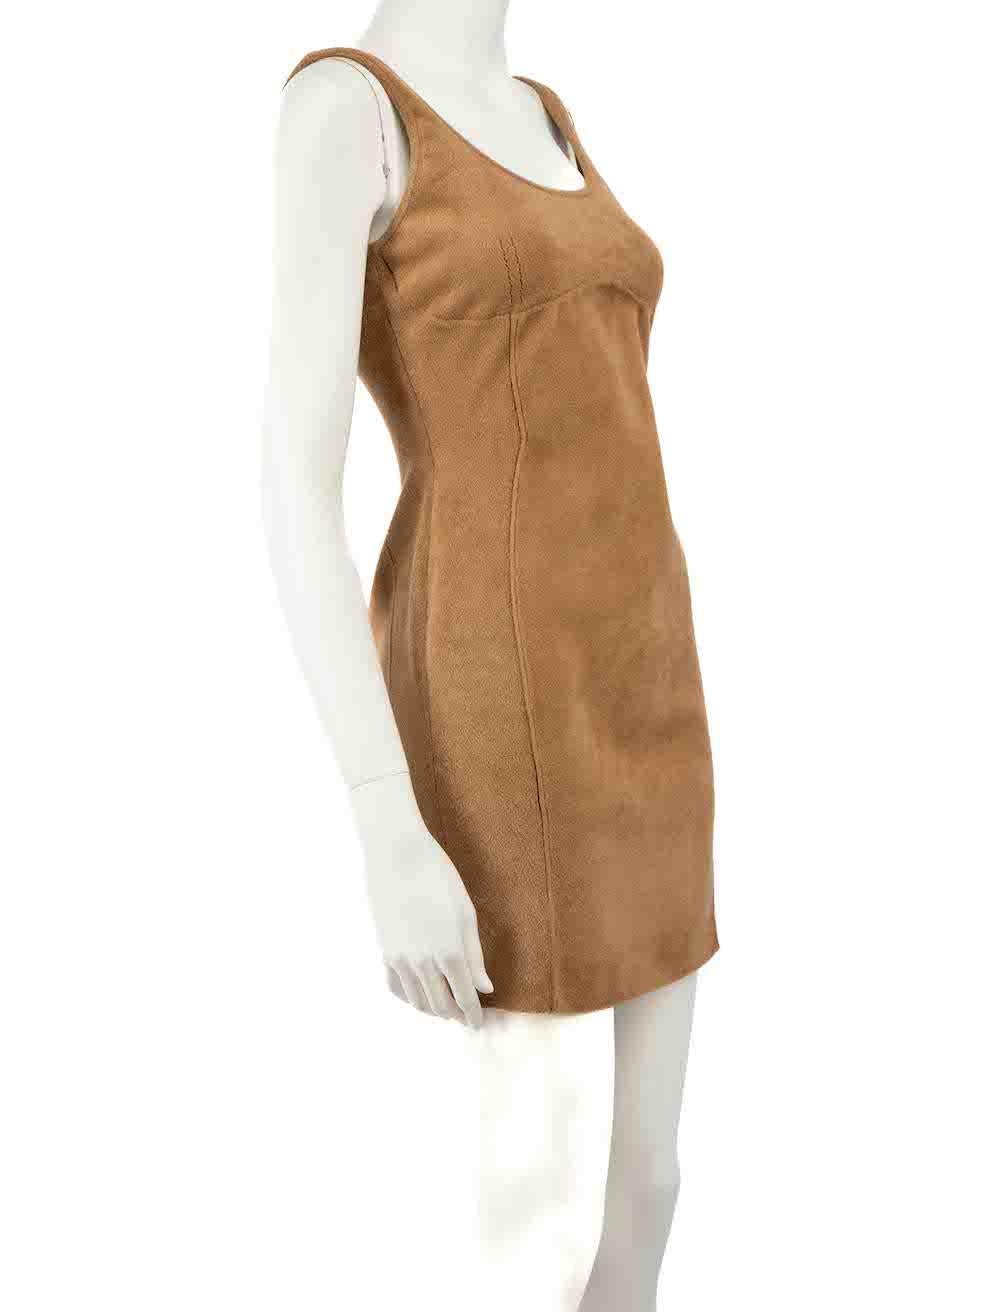 CONDITION is Very good. Hardly any visible wear to dress is evident on this used Fendi x Skims designer resale item.
 
 
 
 Details
 
 
 Fendi x Skims
 
 Brown
 
 Viscose
 
 Knit bodycon dress
 
 Figure hugging fit
 
 Sleeveless
 
 Round neck
 
